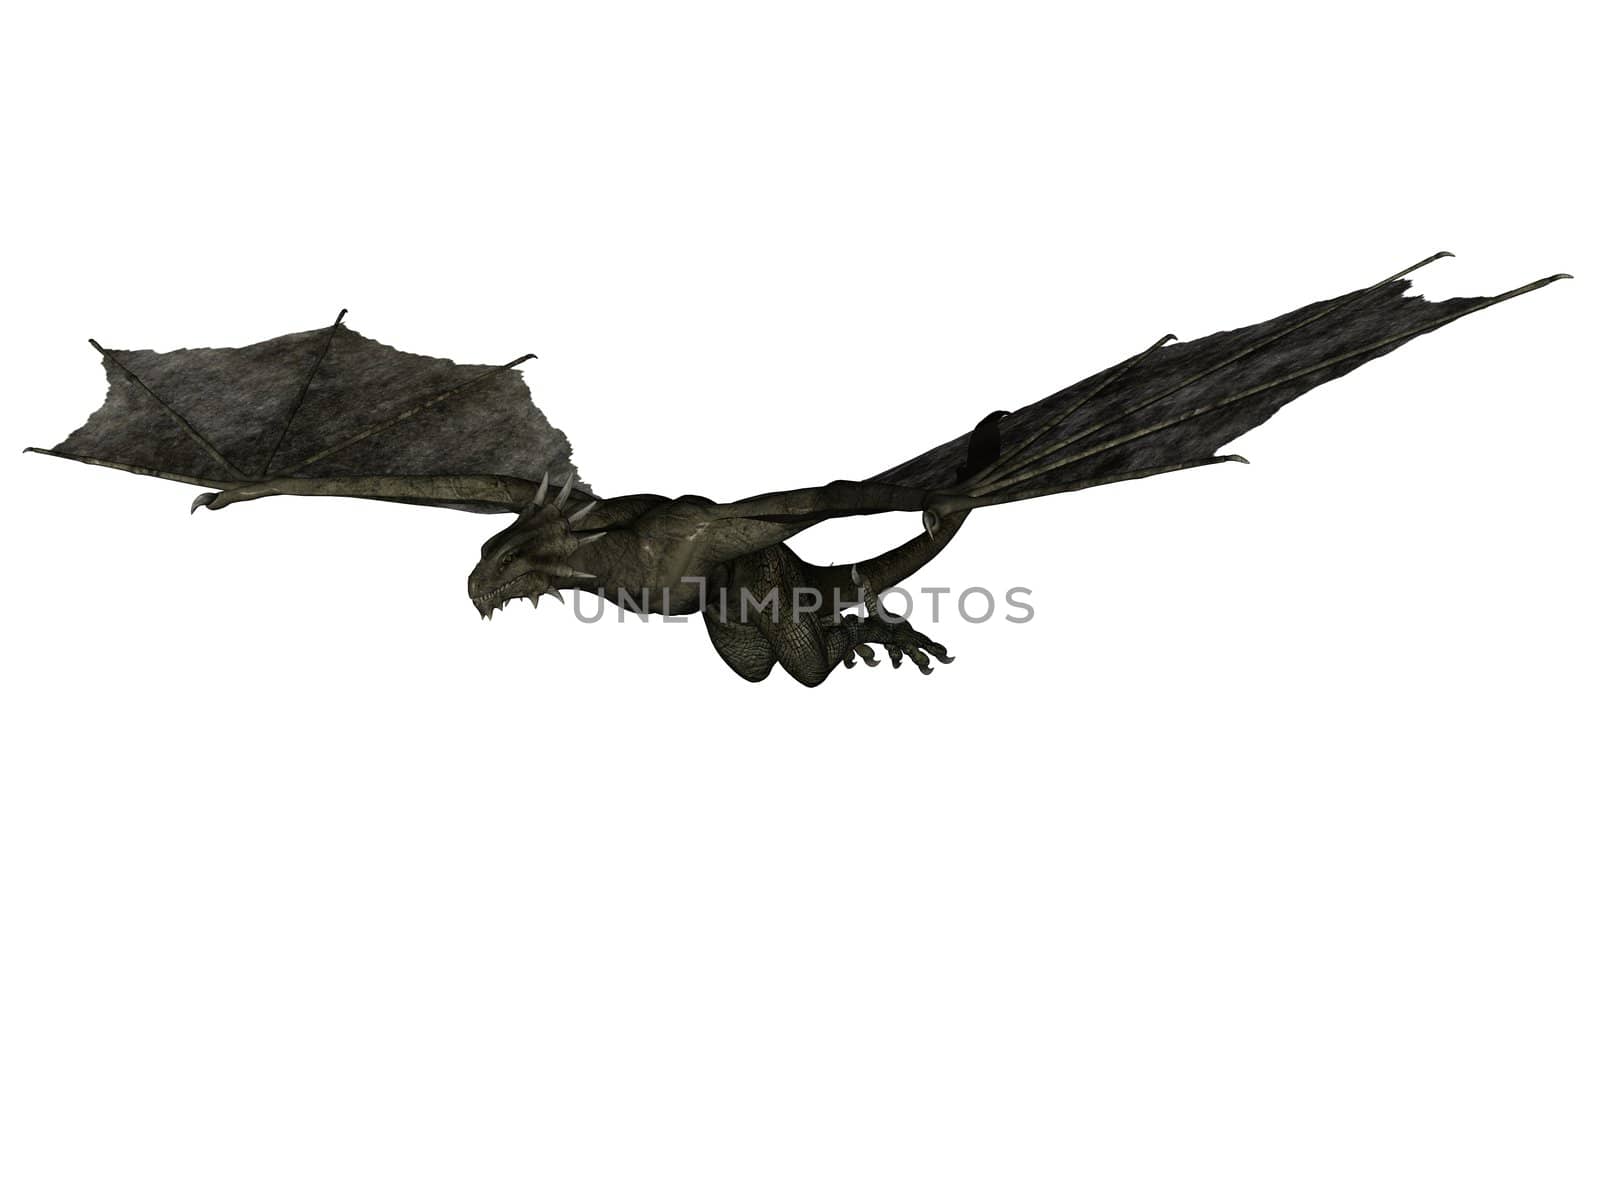 3D rendered fantasy wyvern on white background isolated.